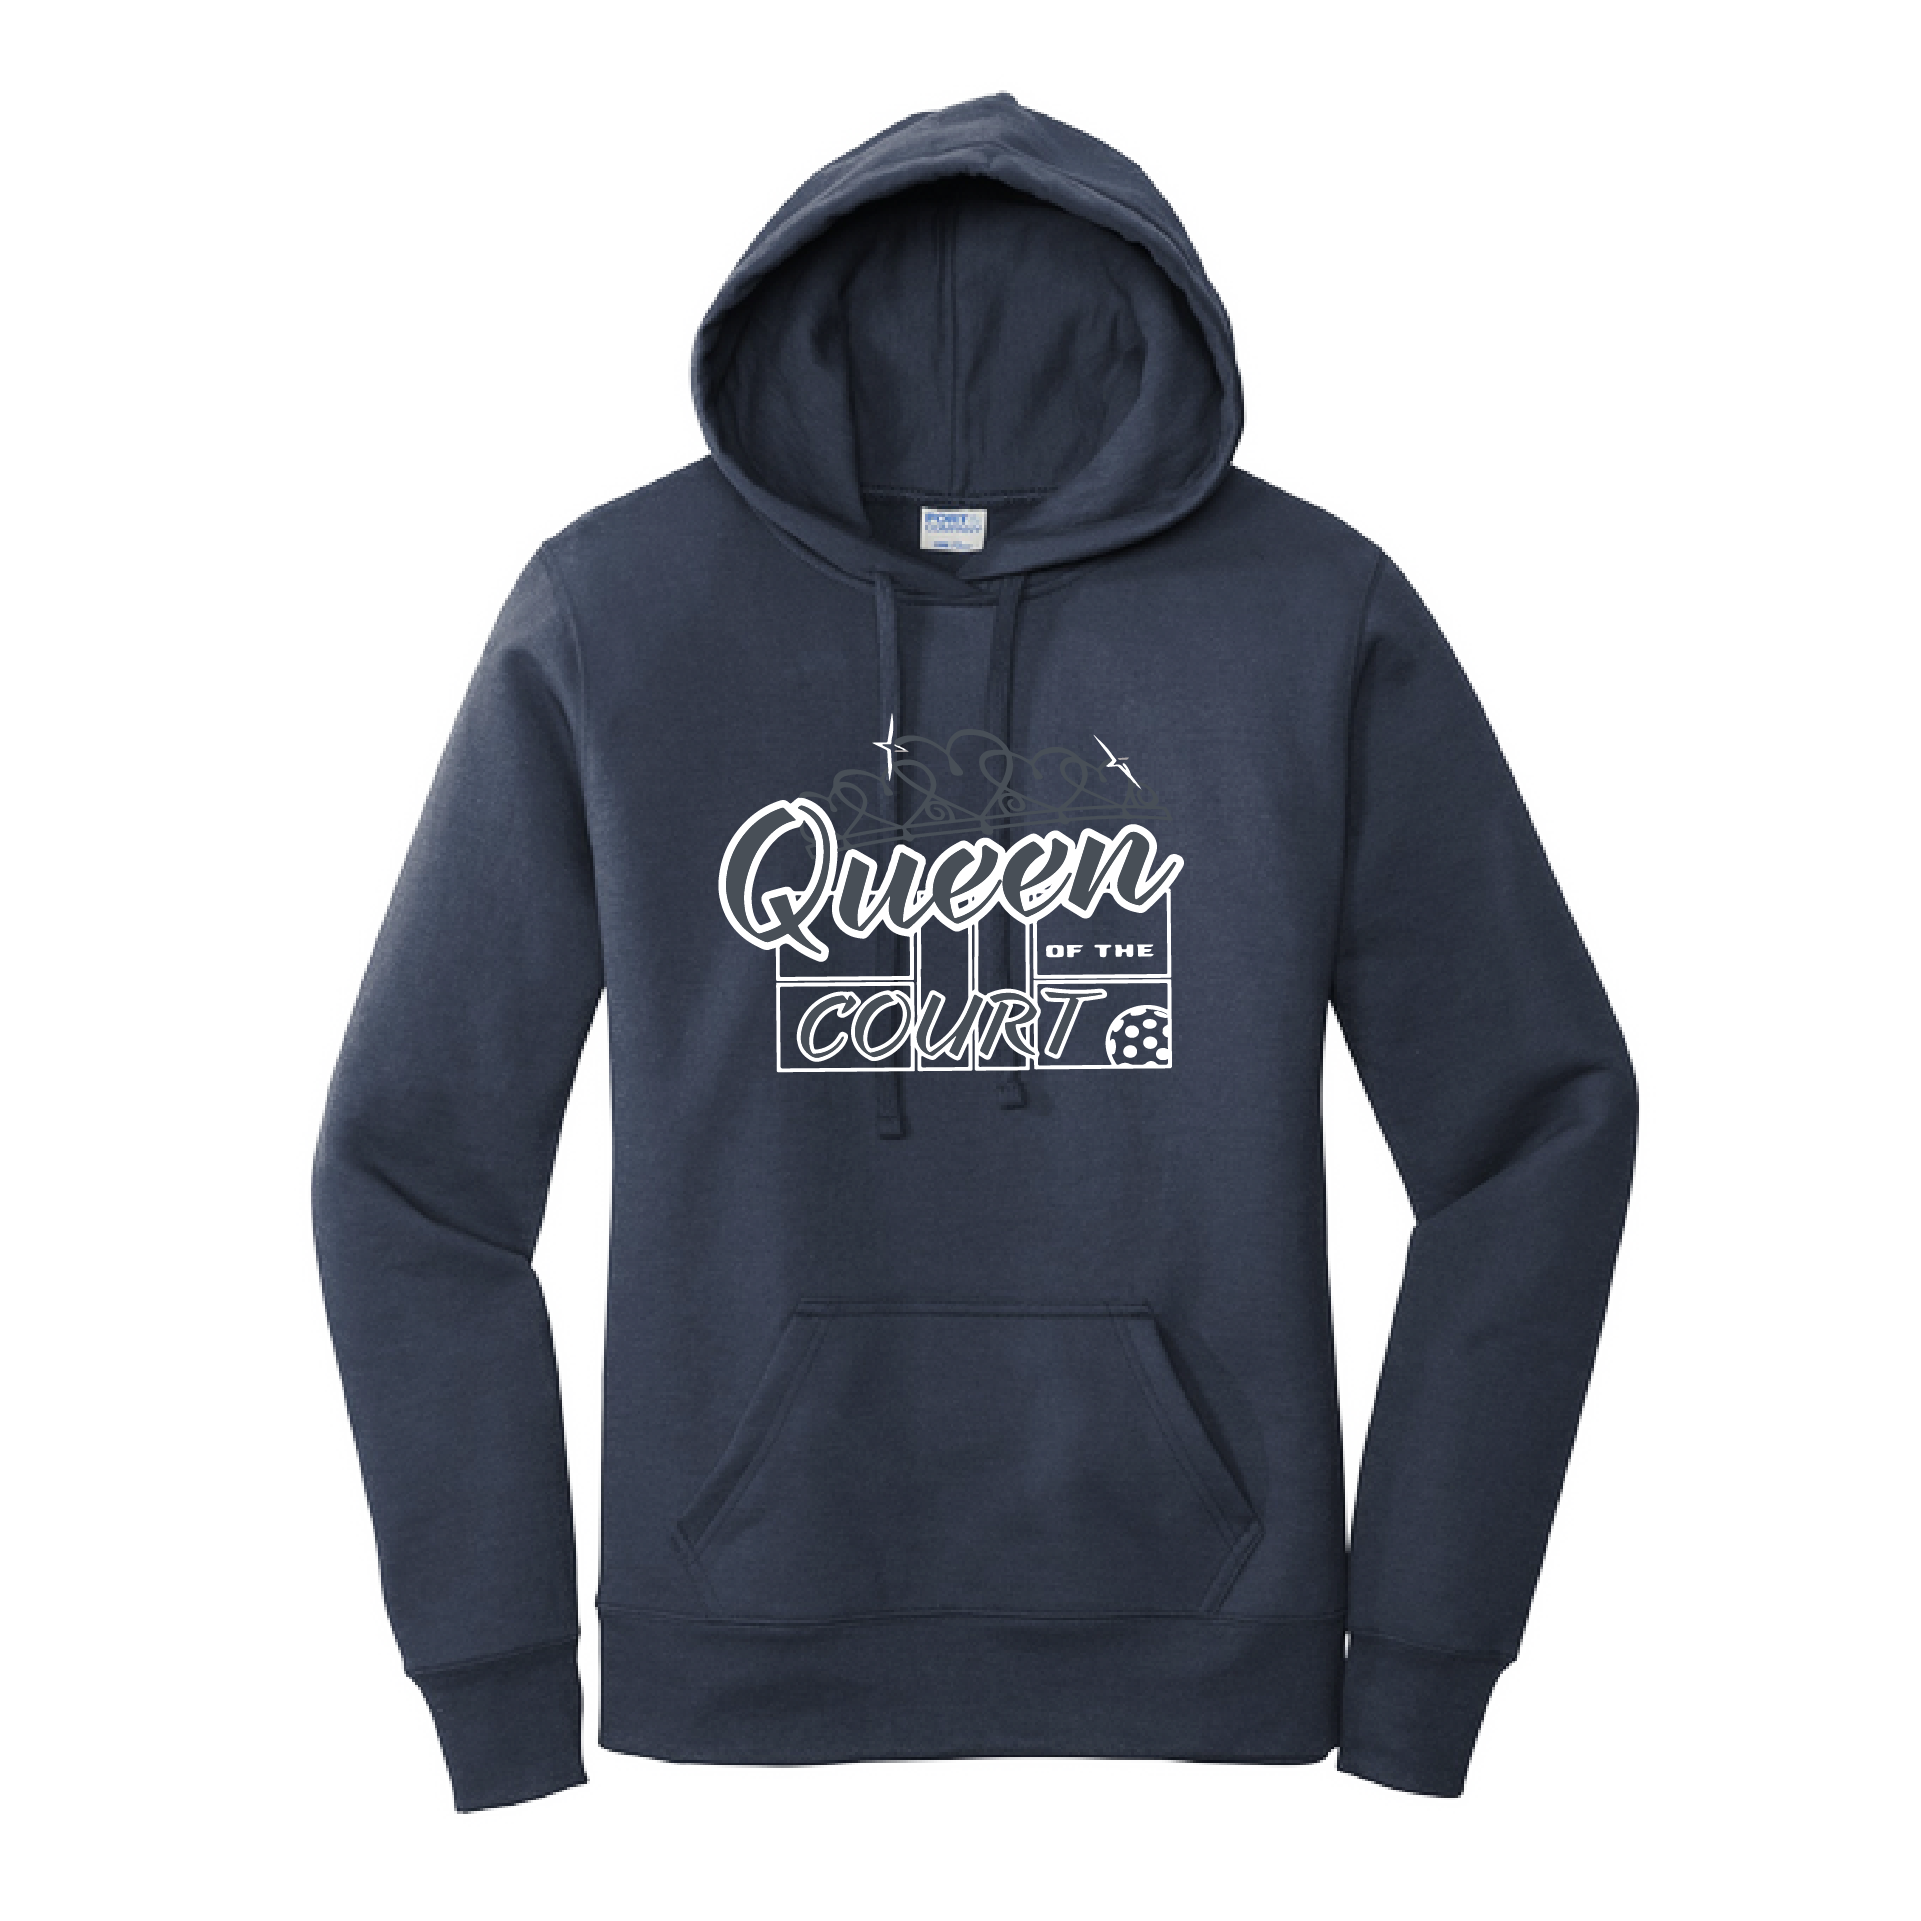 Pickleball Design: Queen of the Court  Women's Hooded pullover Sweatshirt  Turn up the volume in this Women's Sweatshirts with its perfect mix of softness and attitude. Ultra soft lined inside with a lined hood also. This is fitted nicely for a women's figure. Front pouch pocket.